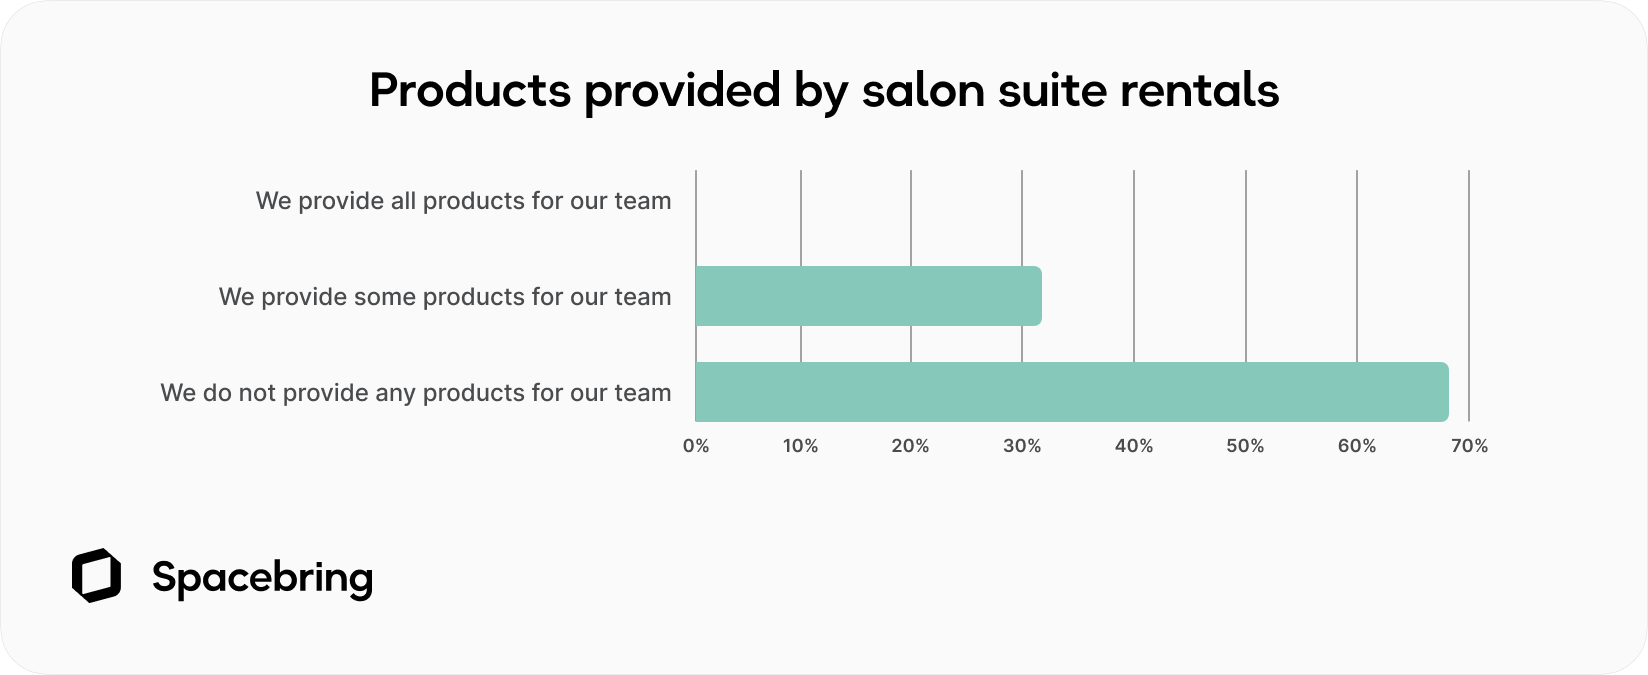 Products provided by salon suite rentals